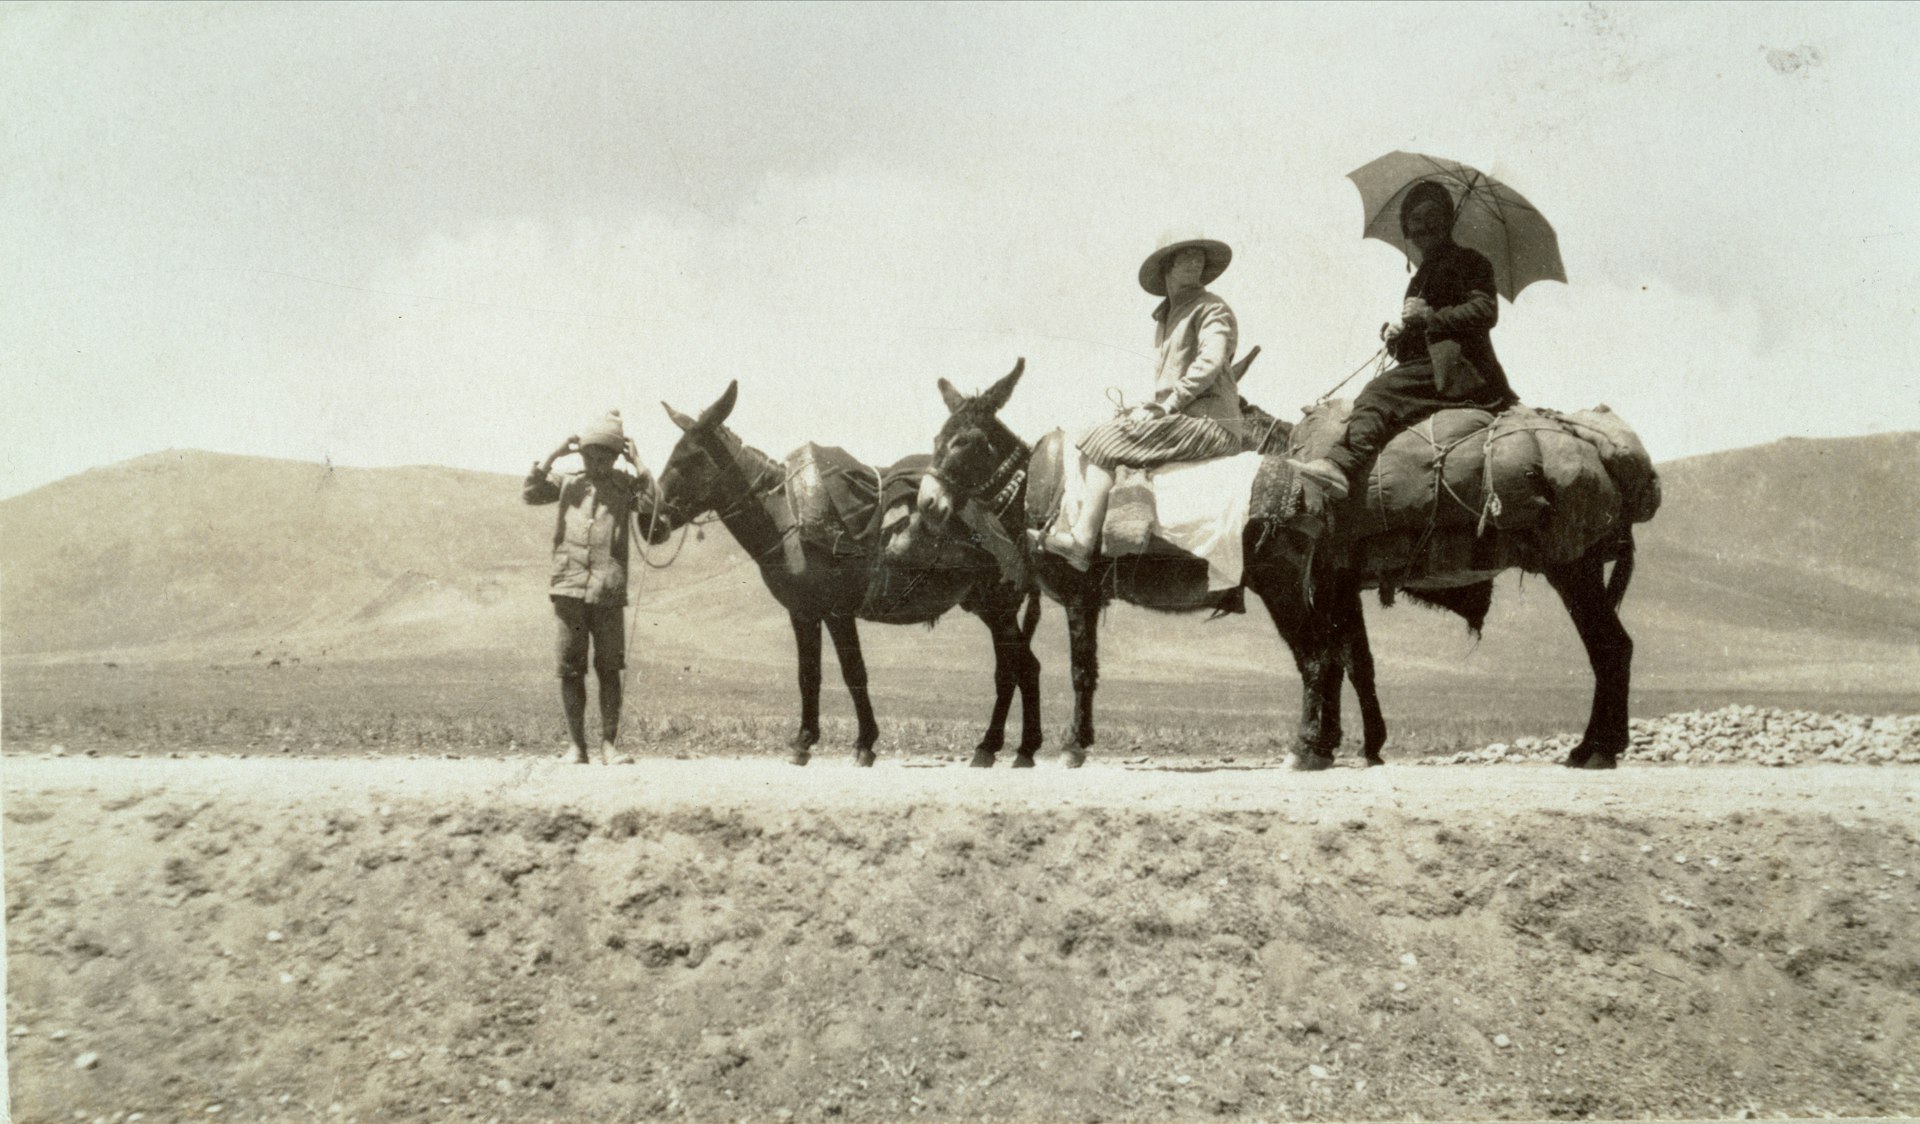 A woman rides a horse in the desert in an old photo. 